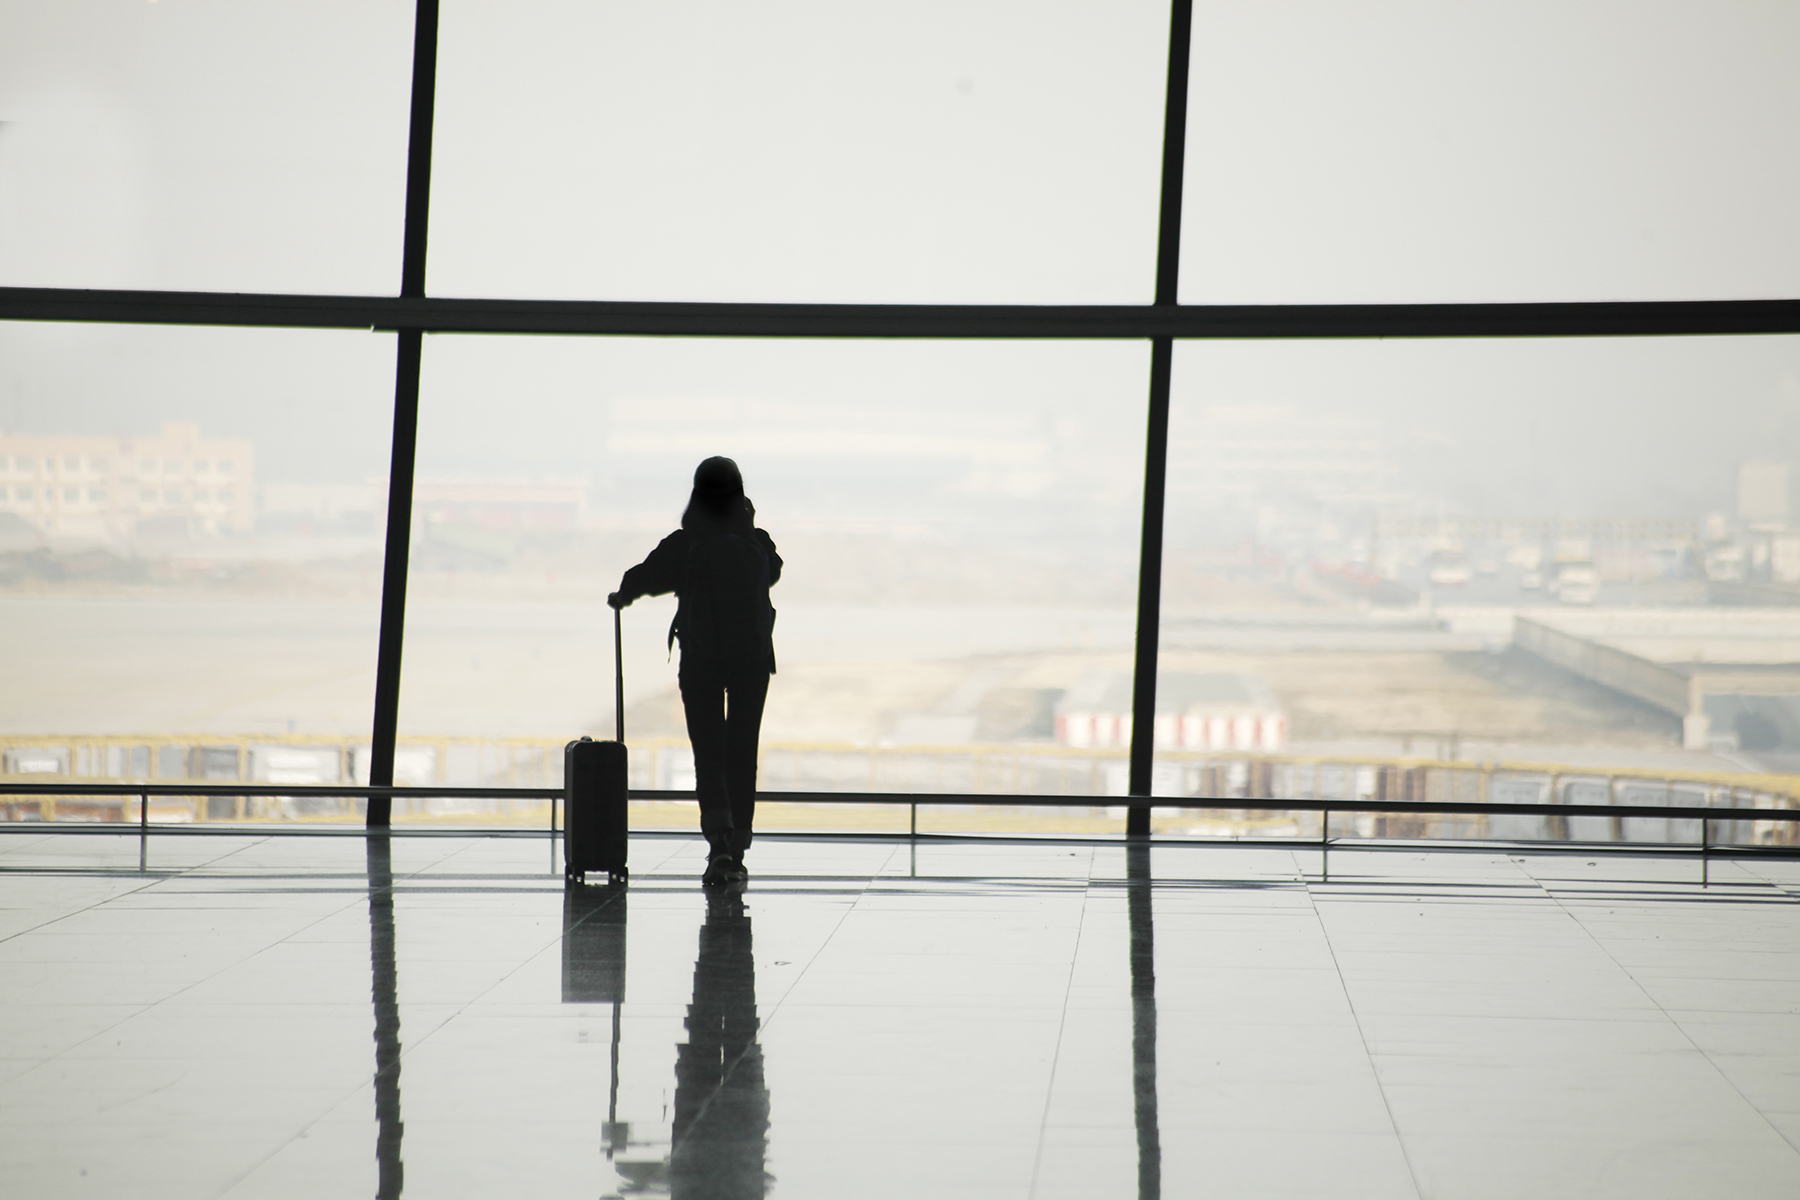 Silhouette of traveler in airport at large window